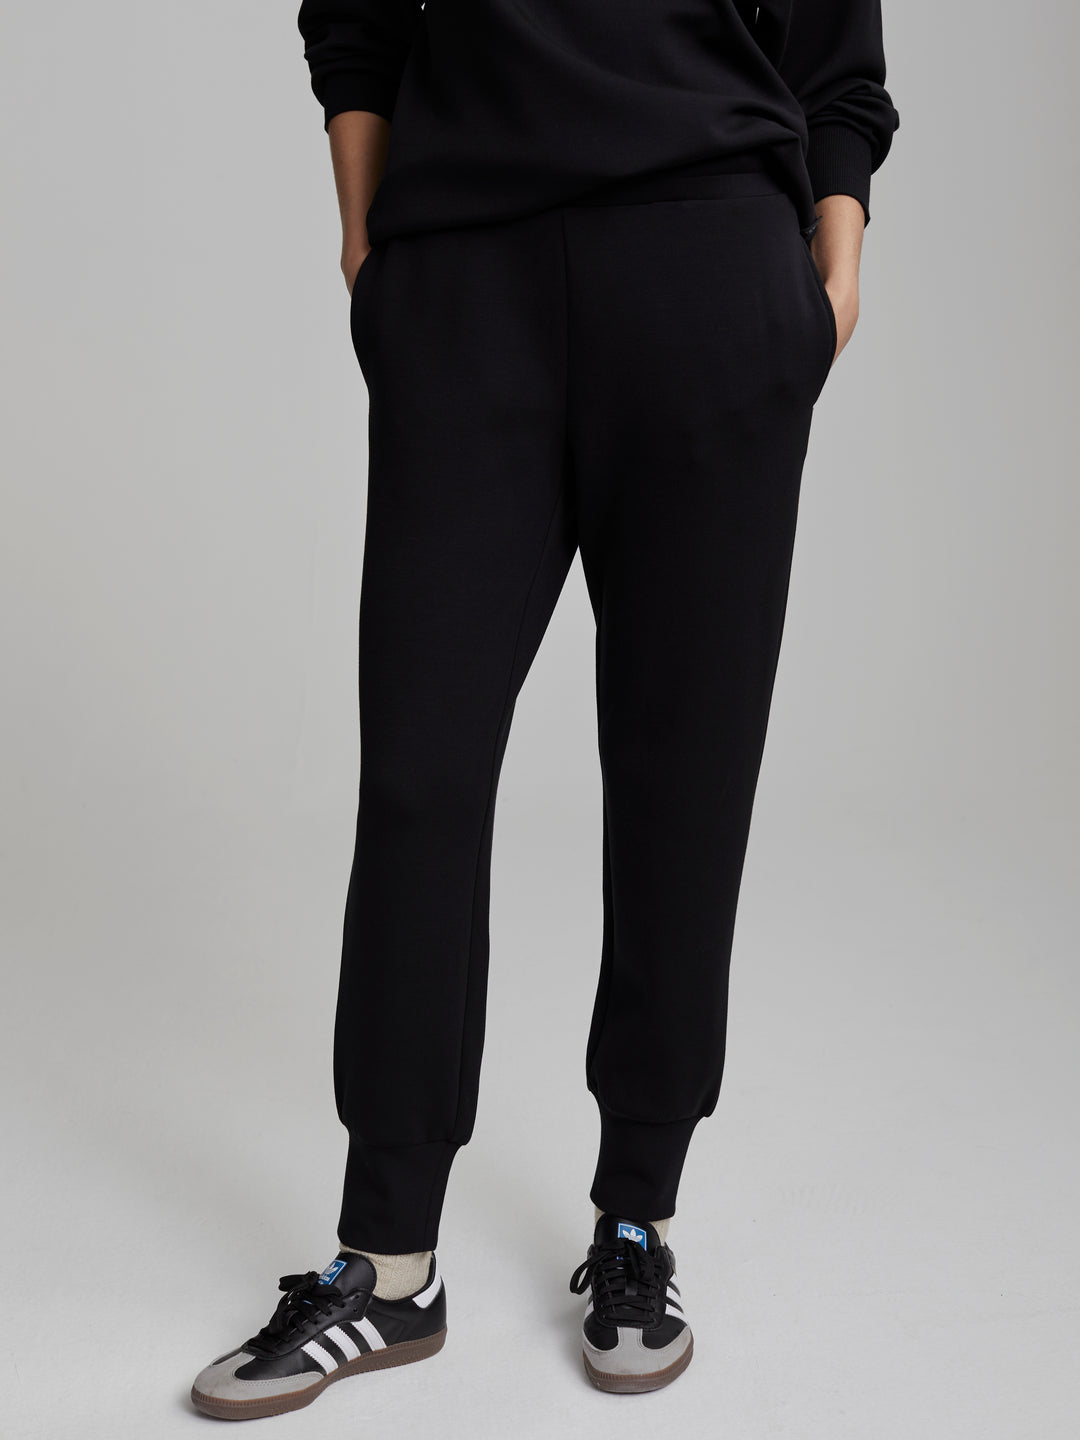 VARLEY  The Slim Cuff Pant 27.5 -Black – madaboutstyle